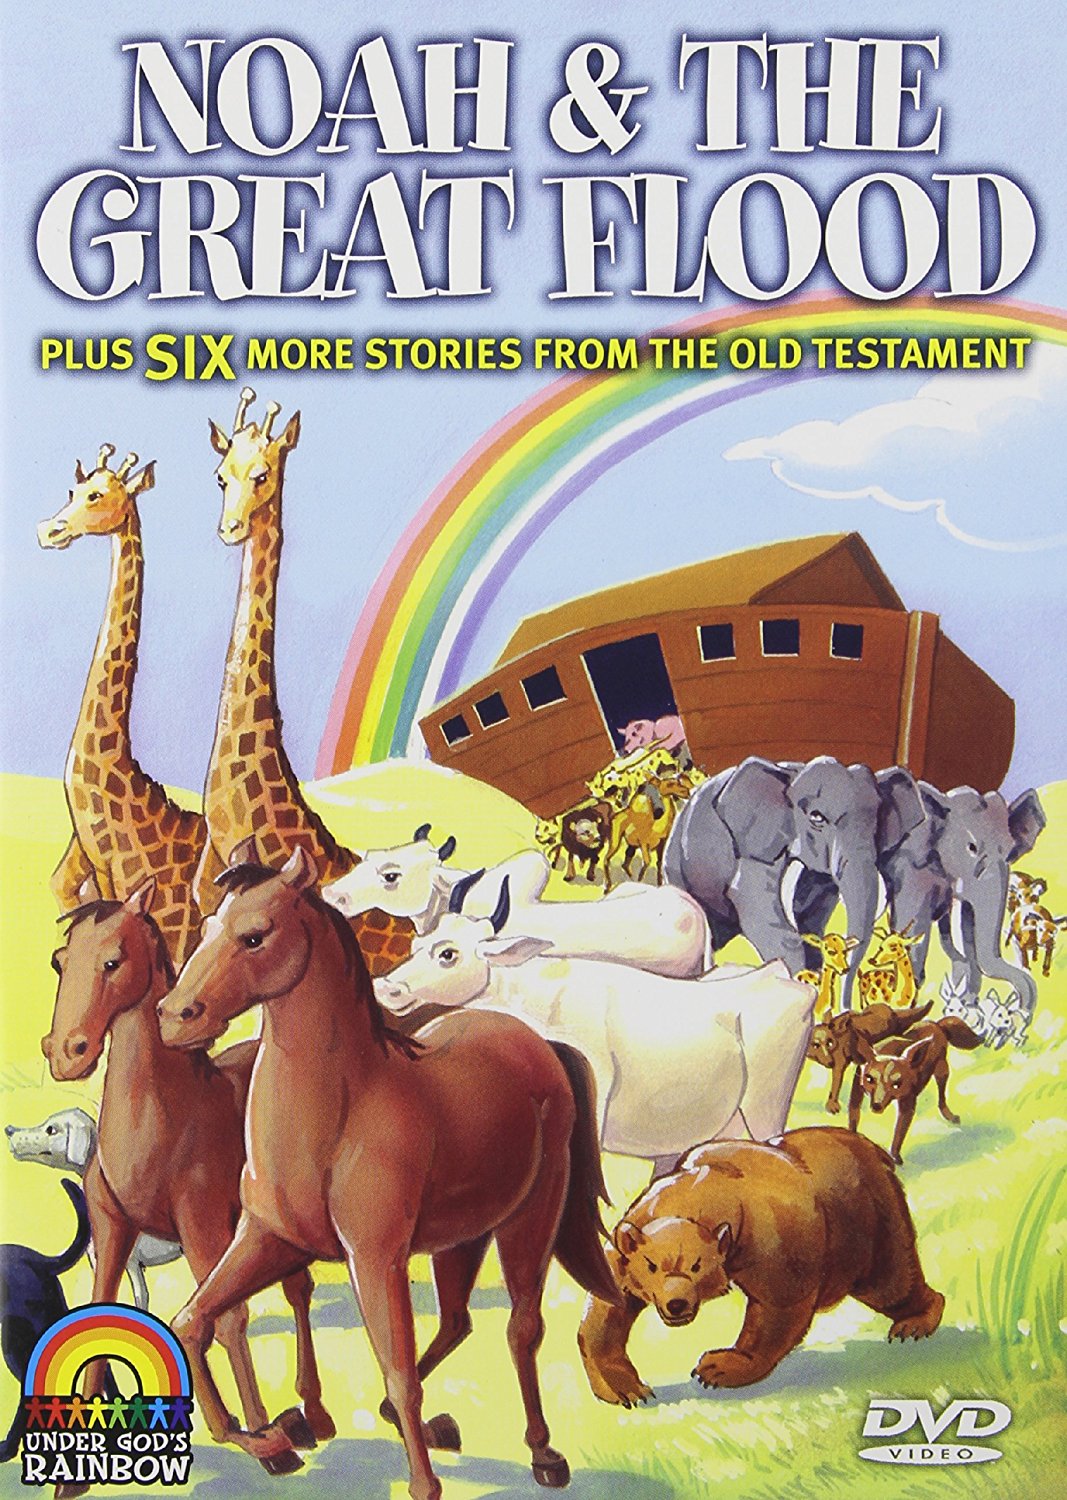 Children's Bible Stories - Noah And The Great Flood Plus 6 More Stories From The Old Testament Under God's Rainbow 